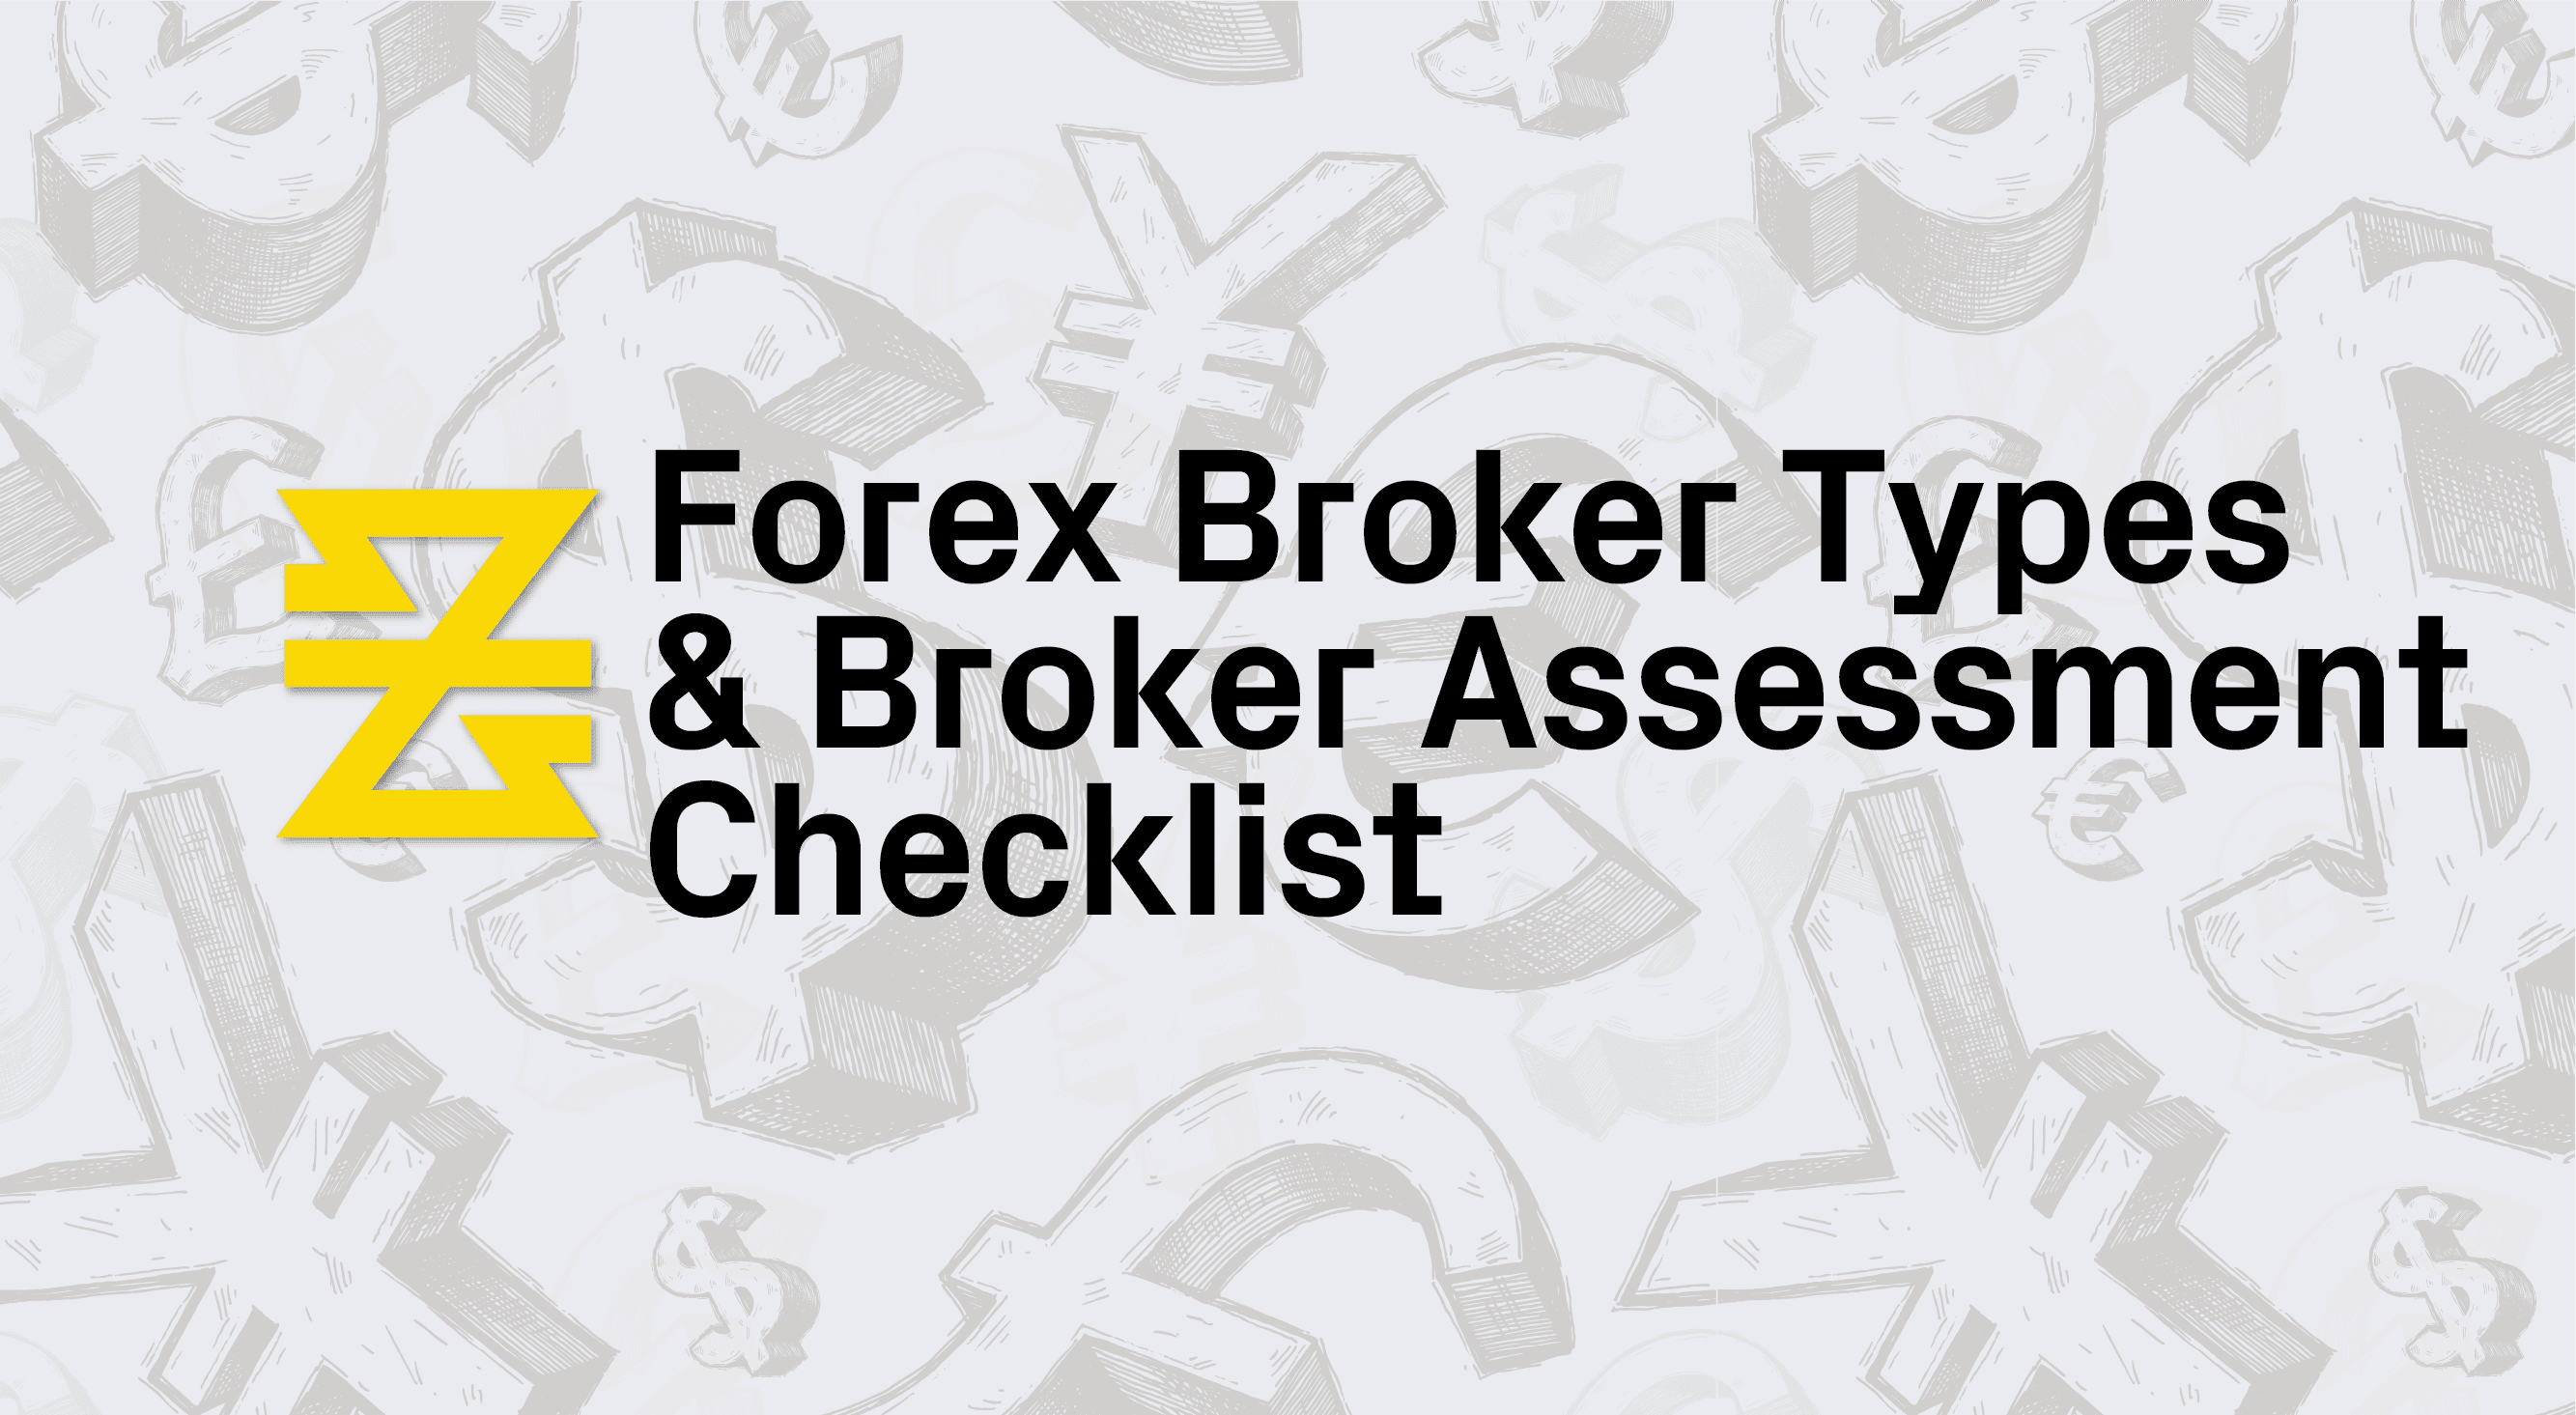 Forex Broker Types and a Broker Assessment Checklist | Lesson 1